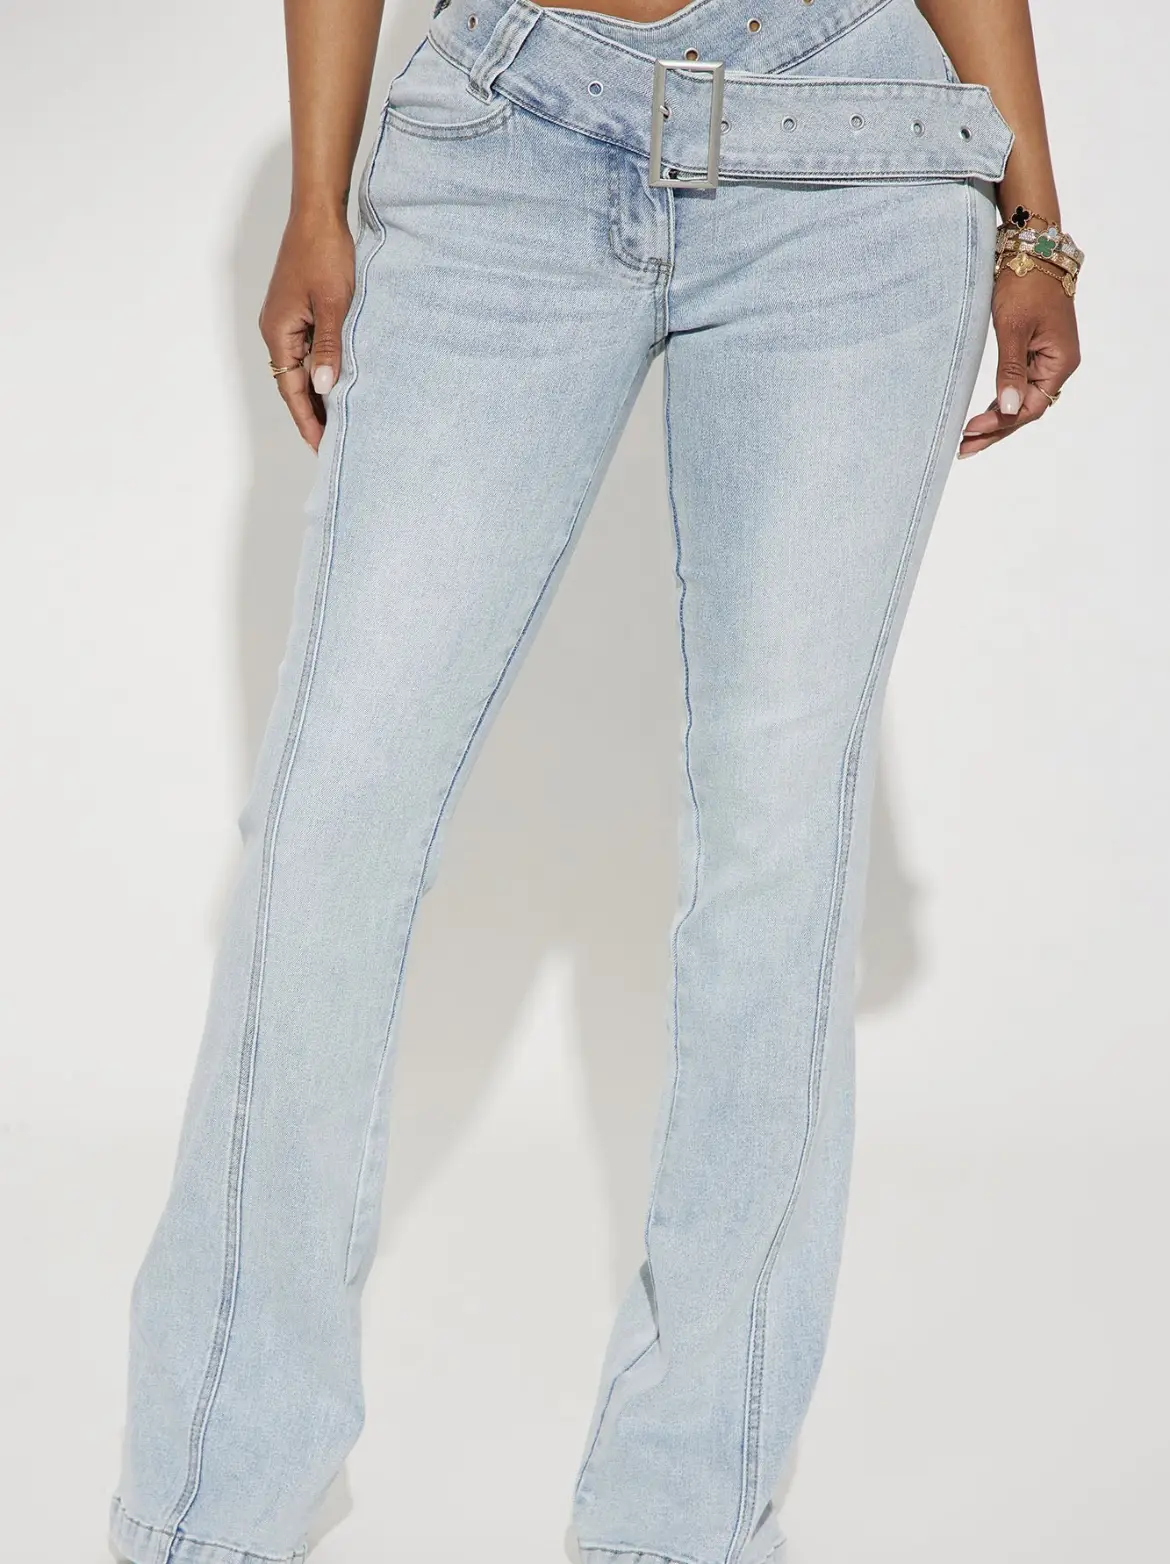 Fashion Nova Lace Up Jeans - I don't know which of these 'naked jeans' are  worse